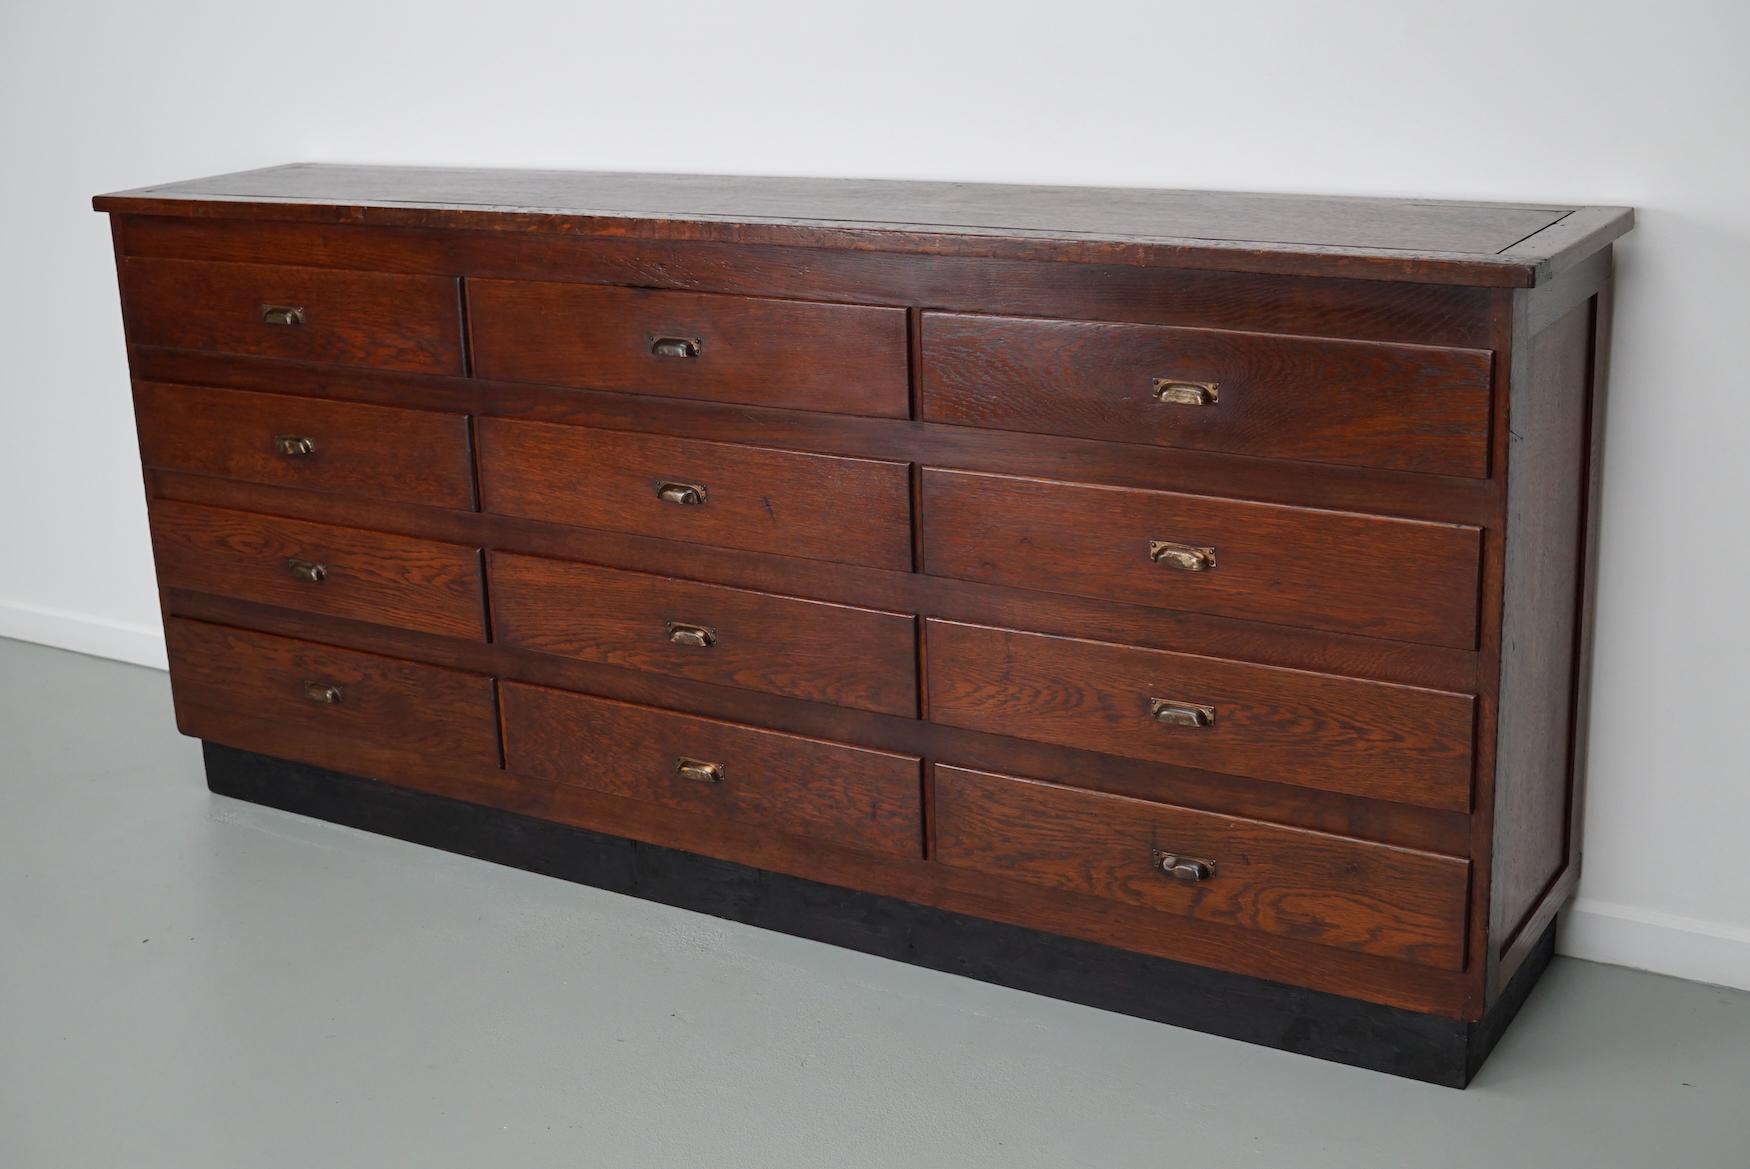 This apothecary / filing cabinet was produced during the 1950s in the Netherlands. This piece features 12 decent sized drawers. The interior dimensions of the drawers are: DWH 34 x 27 x 14 / 18 cm